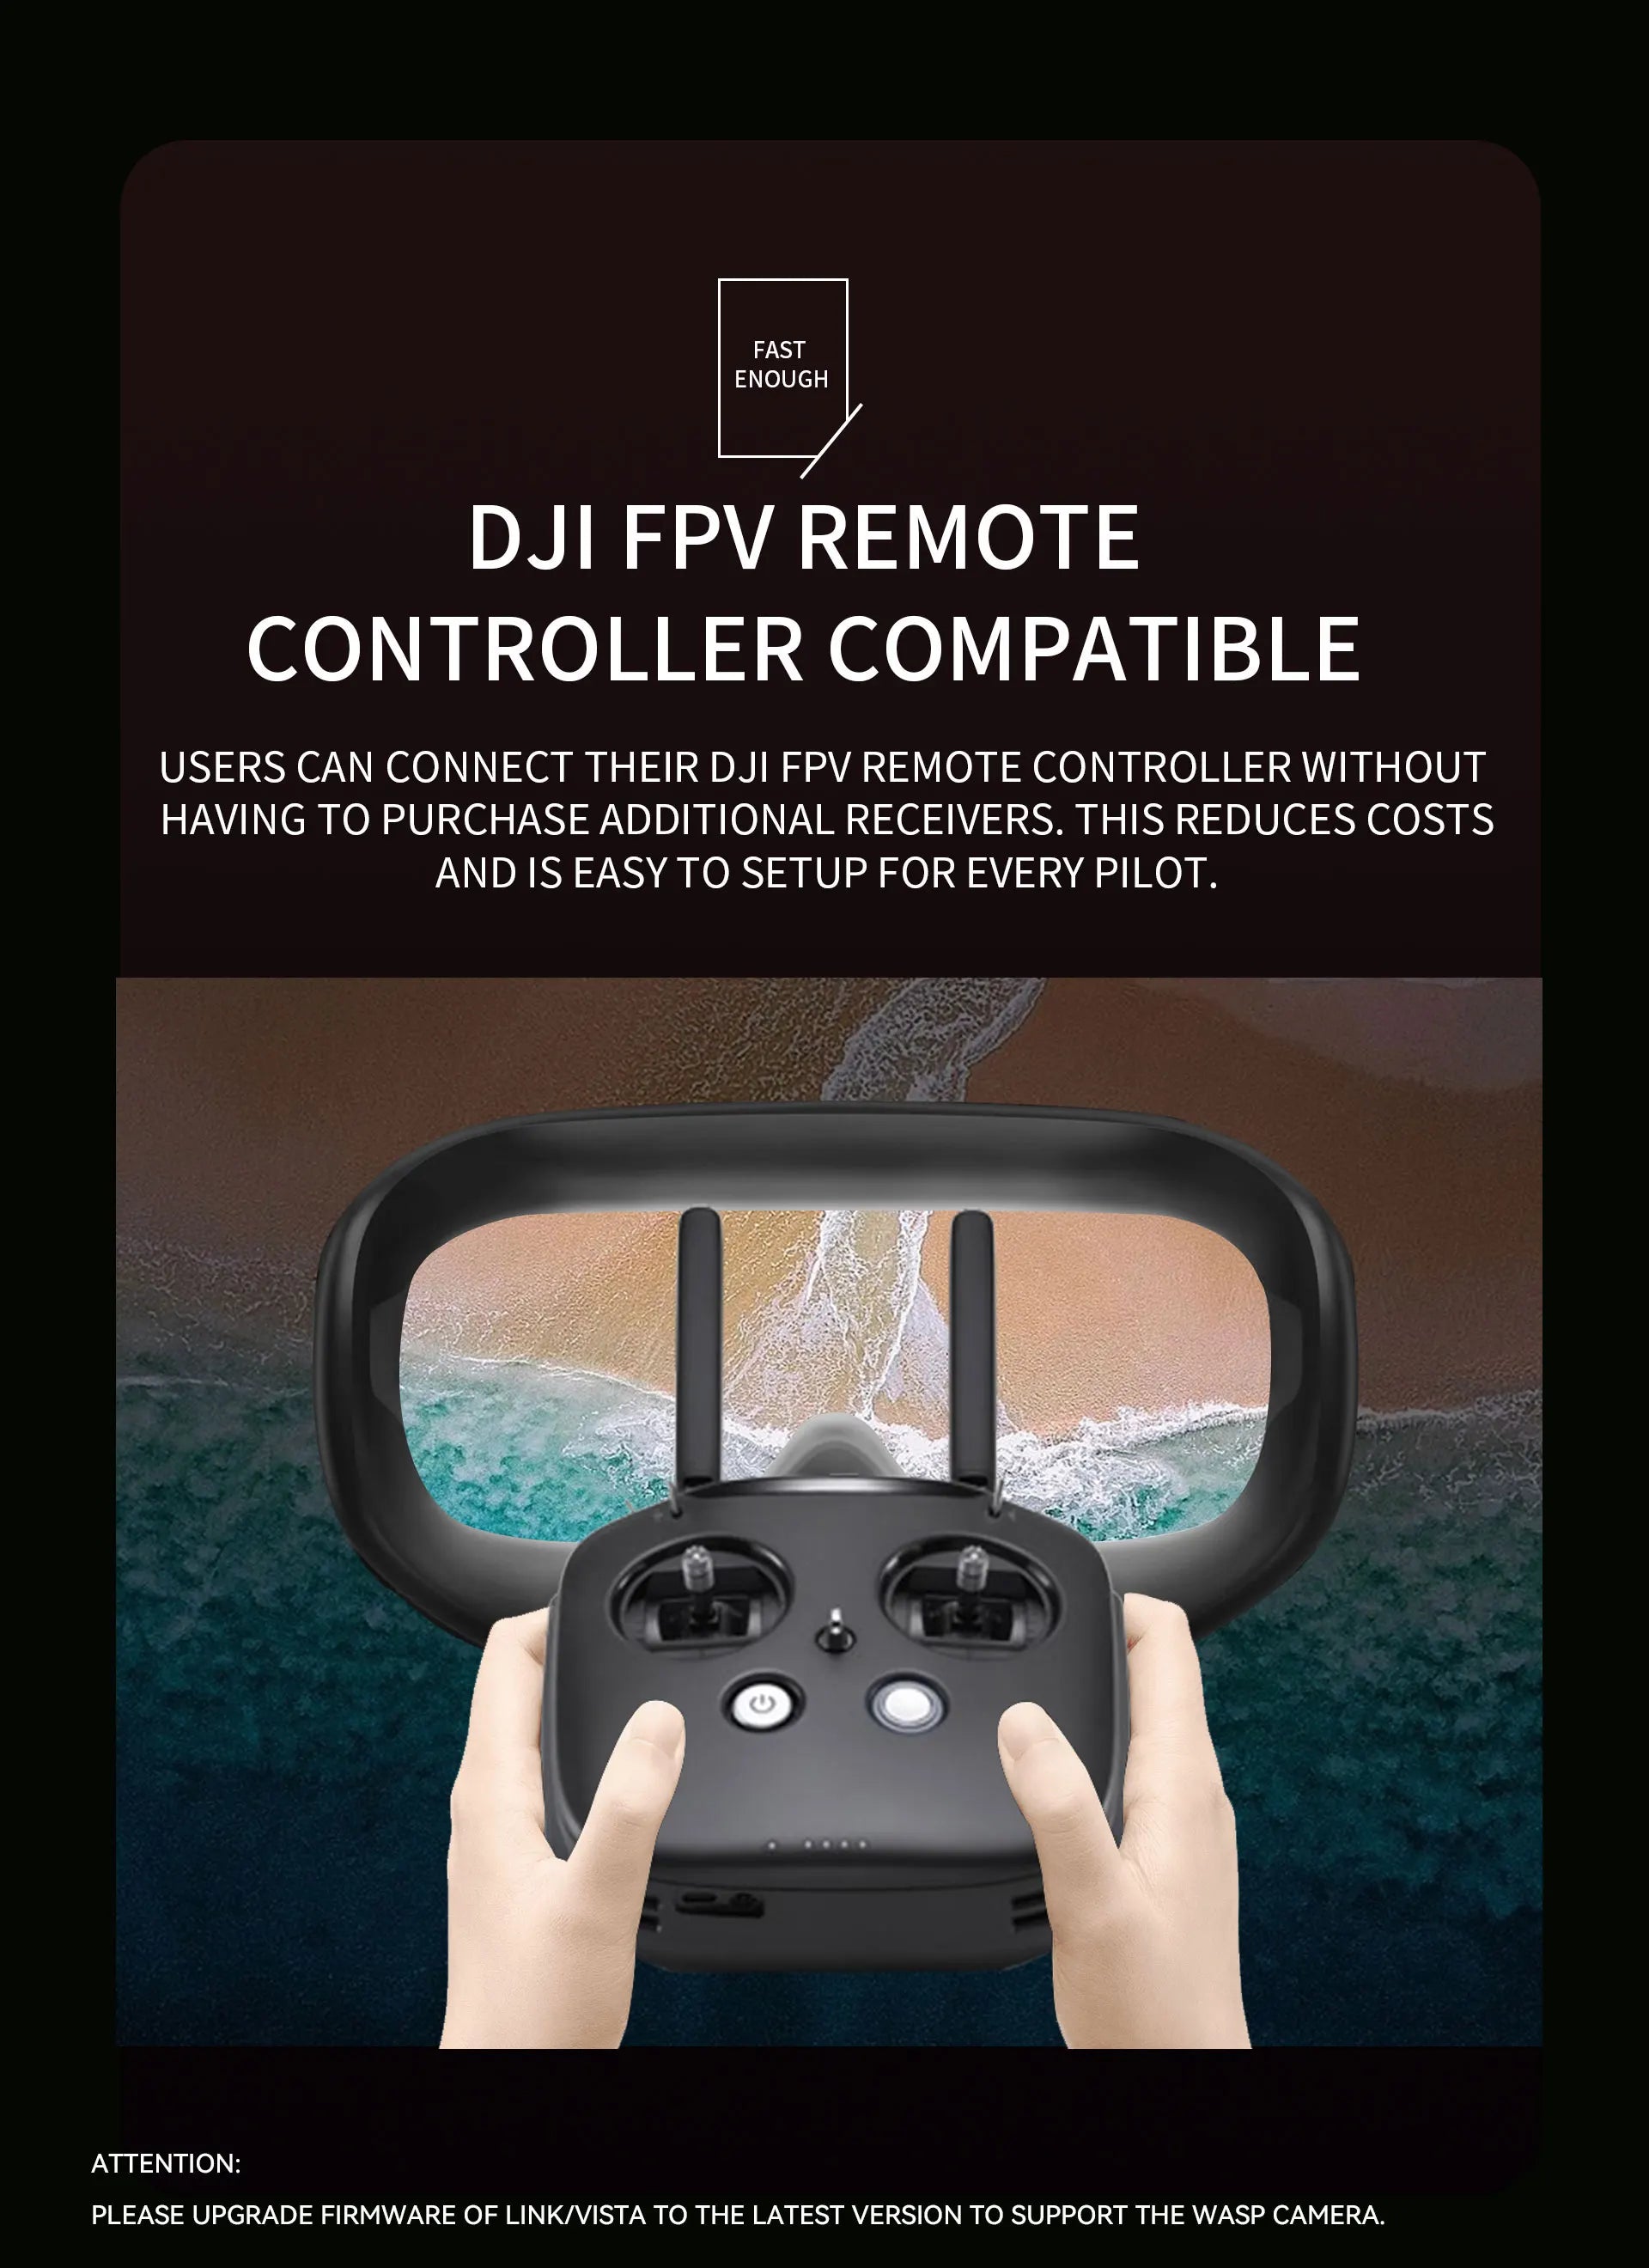 RunCam Link Wasp, DJI FPV REMOTE CONTROLLER COMPATIBLE USERS CAN